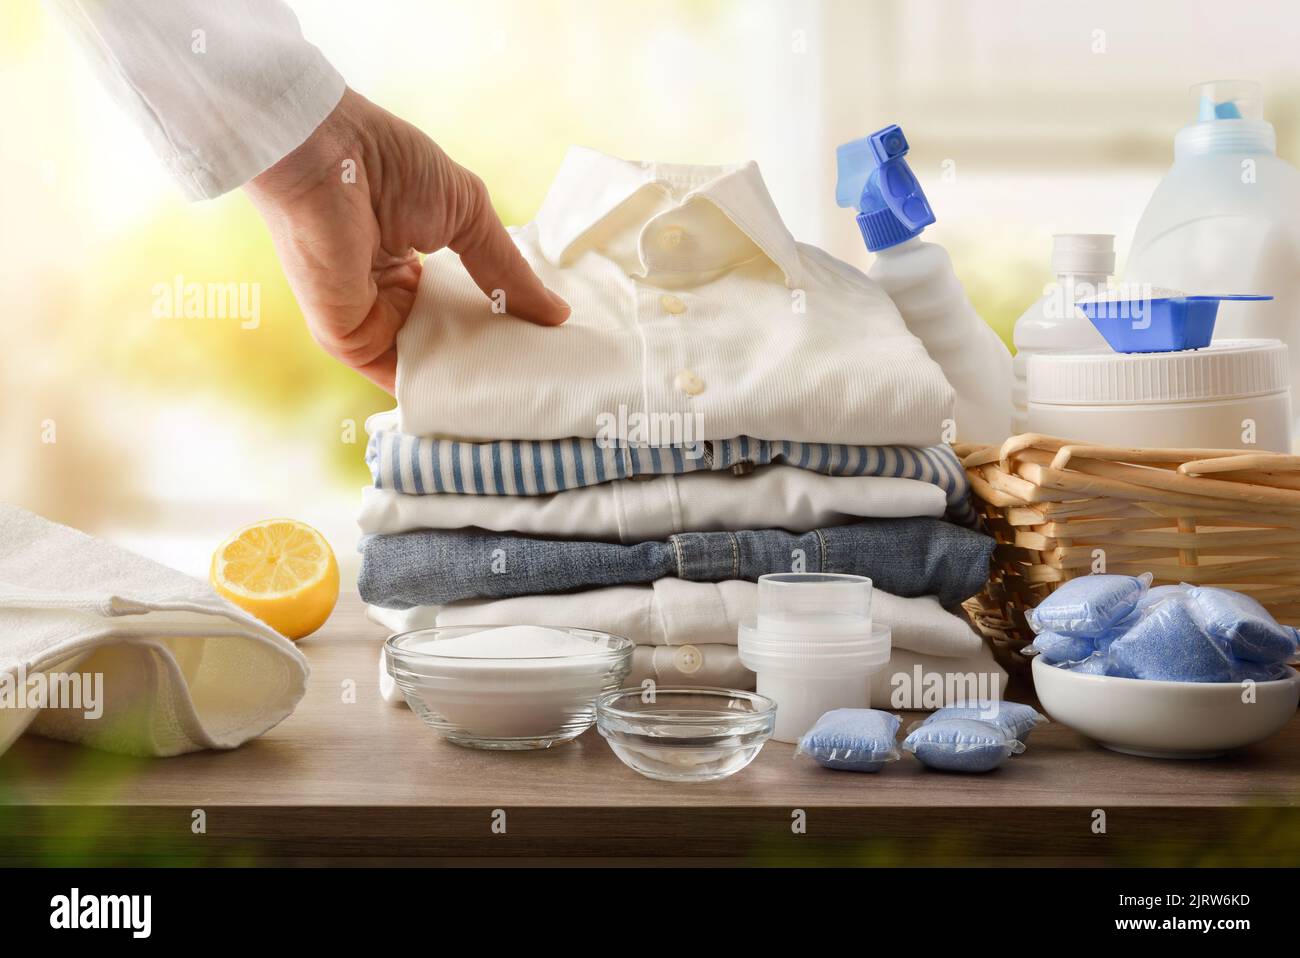 Products and person showing freshly washed clothes in a room with a window in the background. Front view. Horizontal composition. Stock Photo